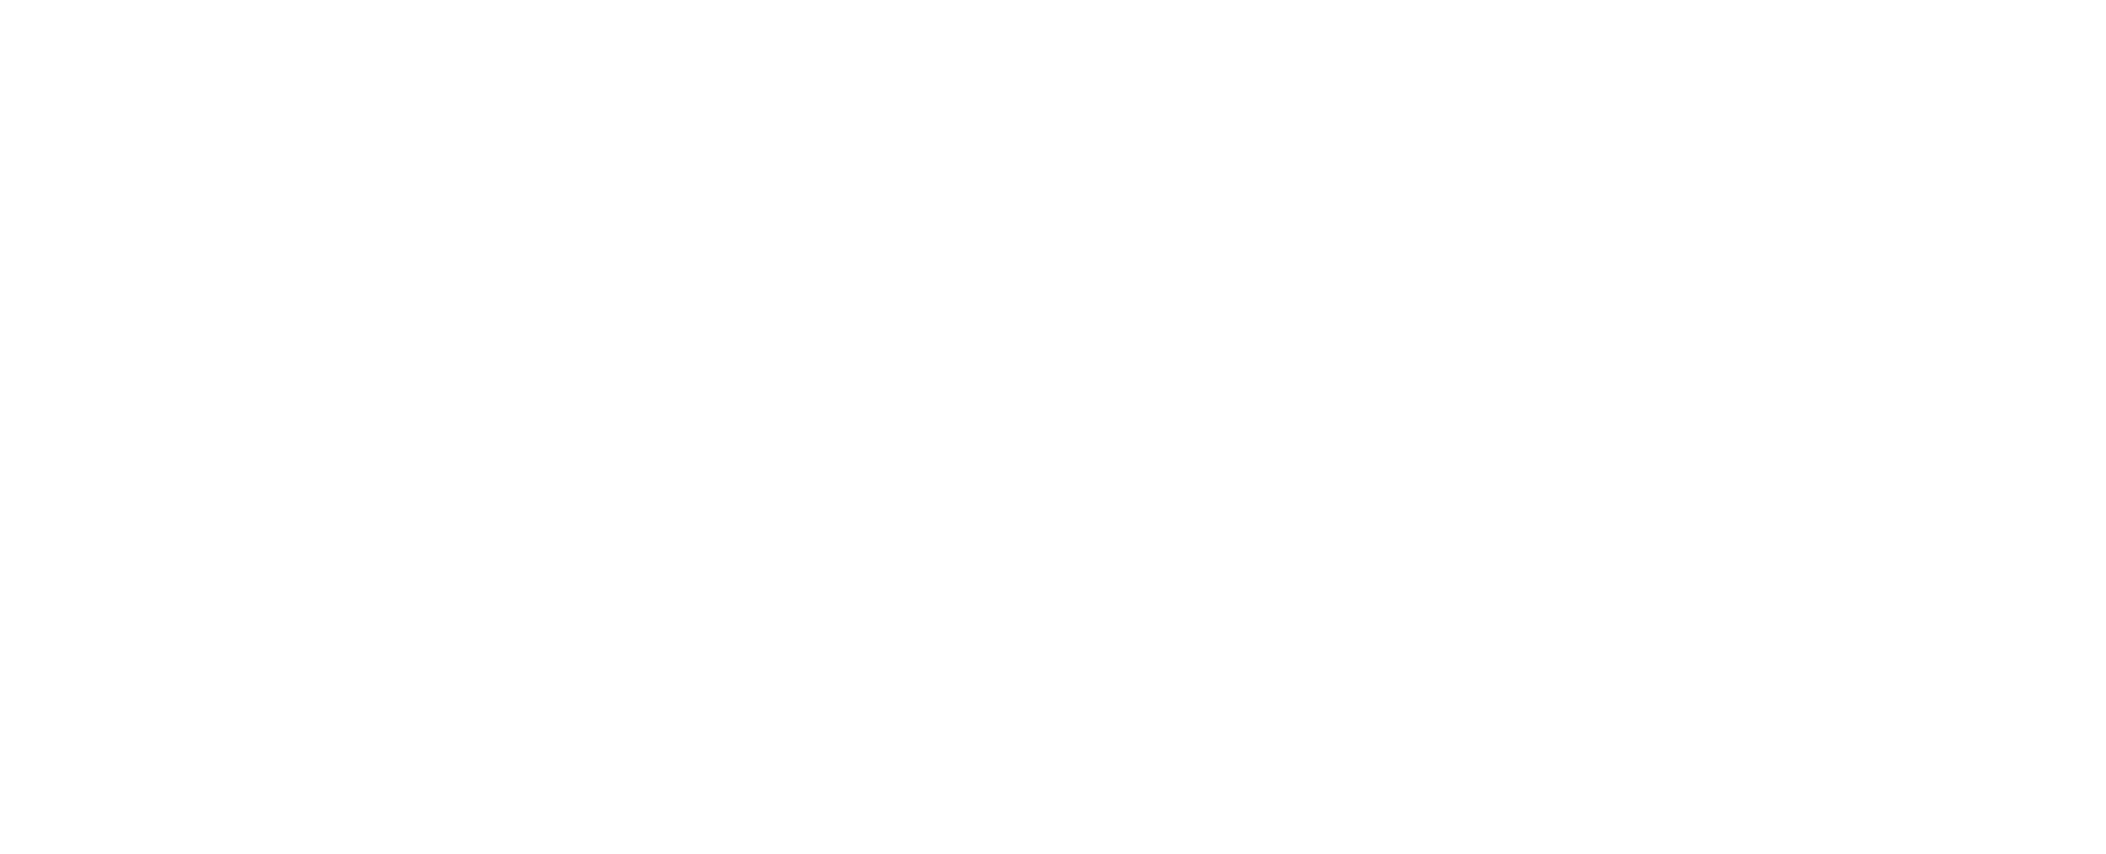 flowject.be